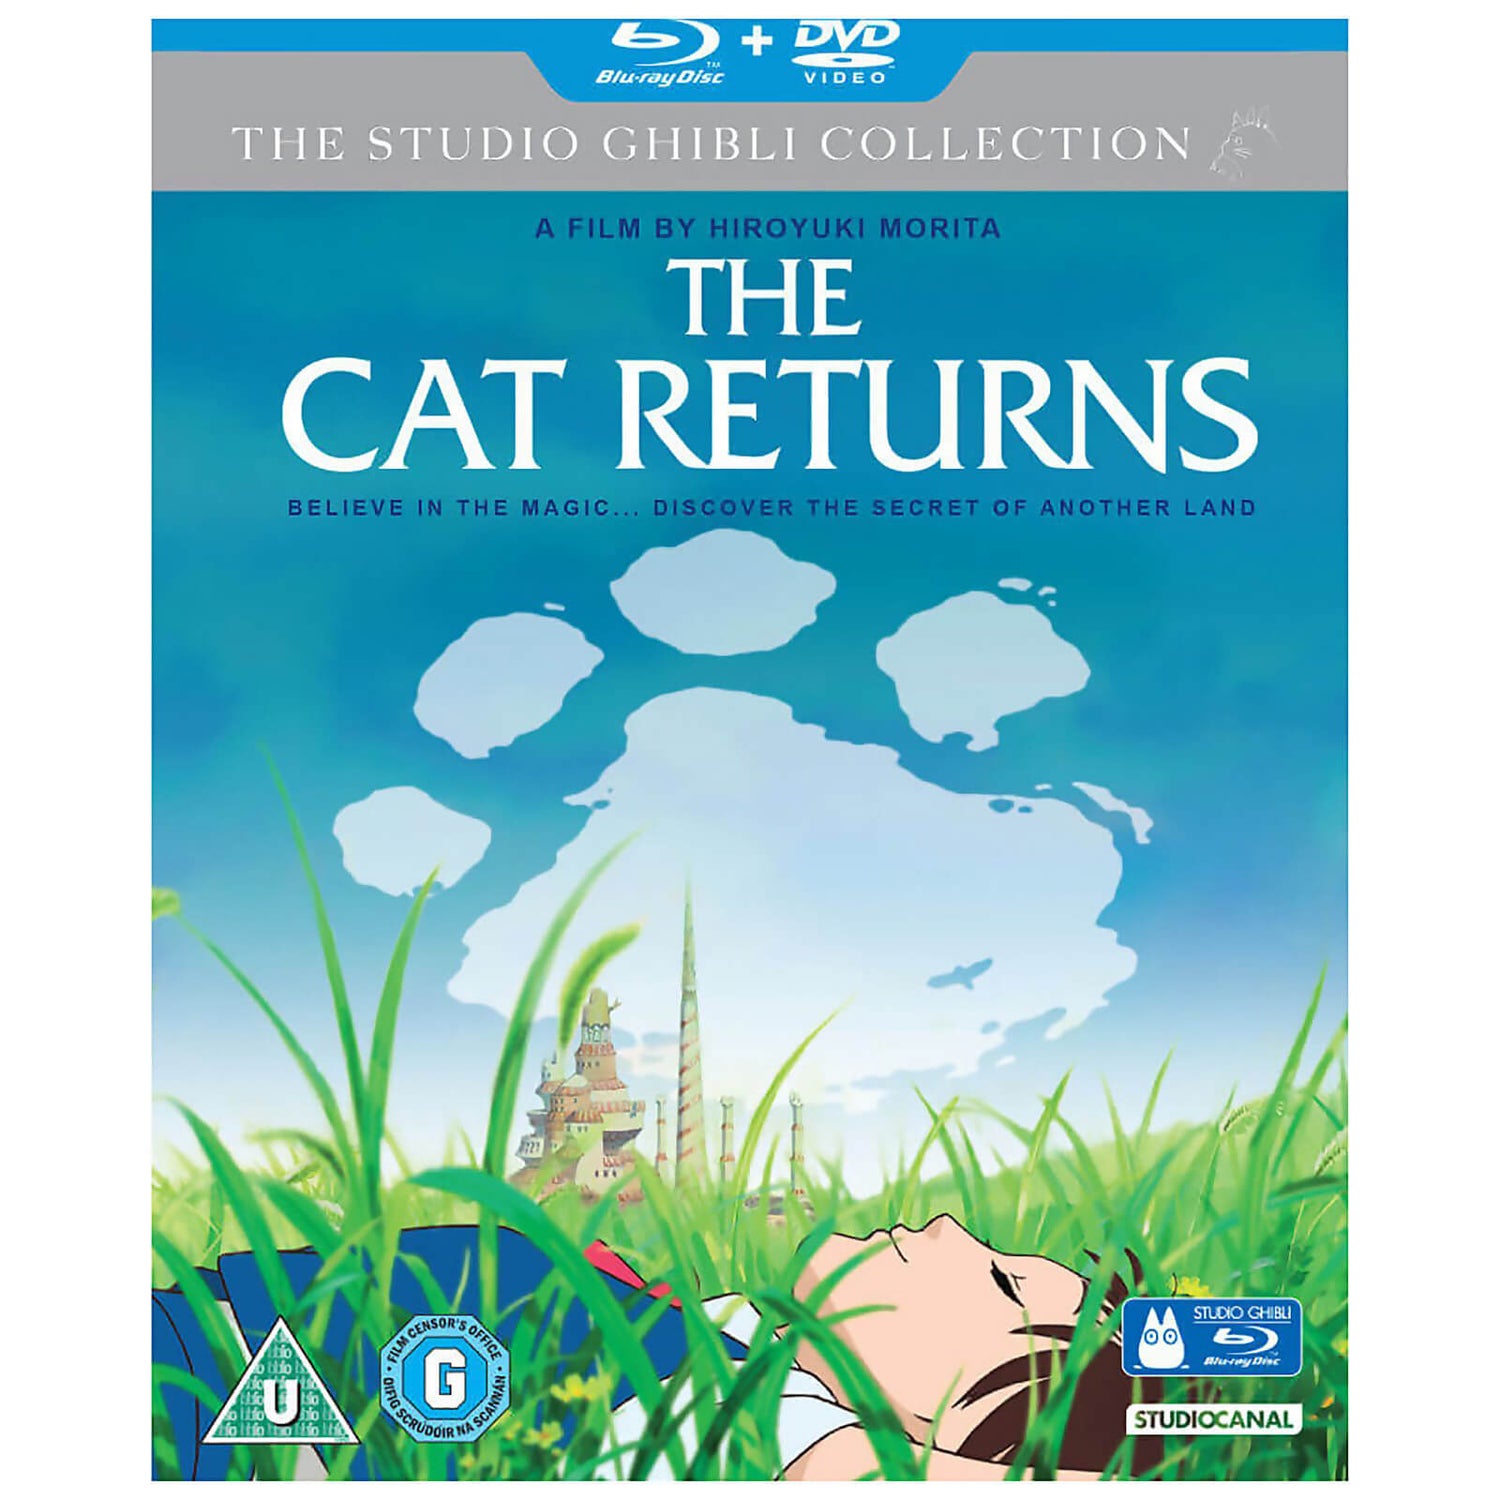 The Cat Returns (Includes DVD)